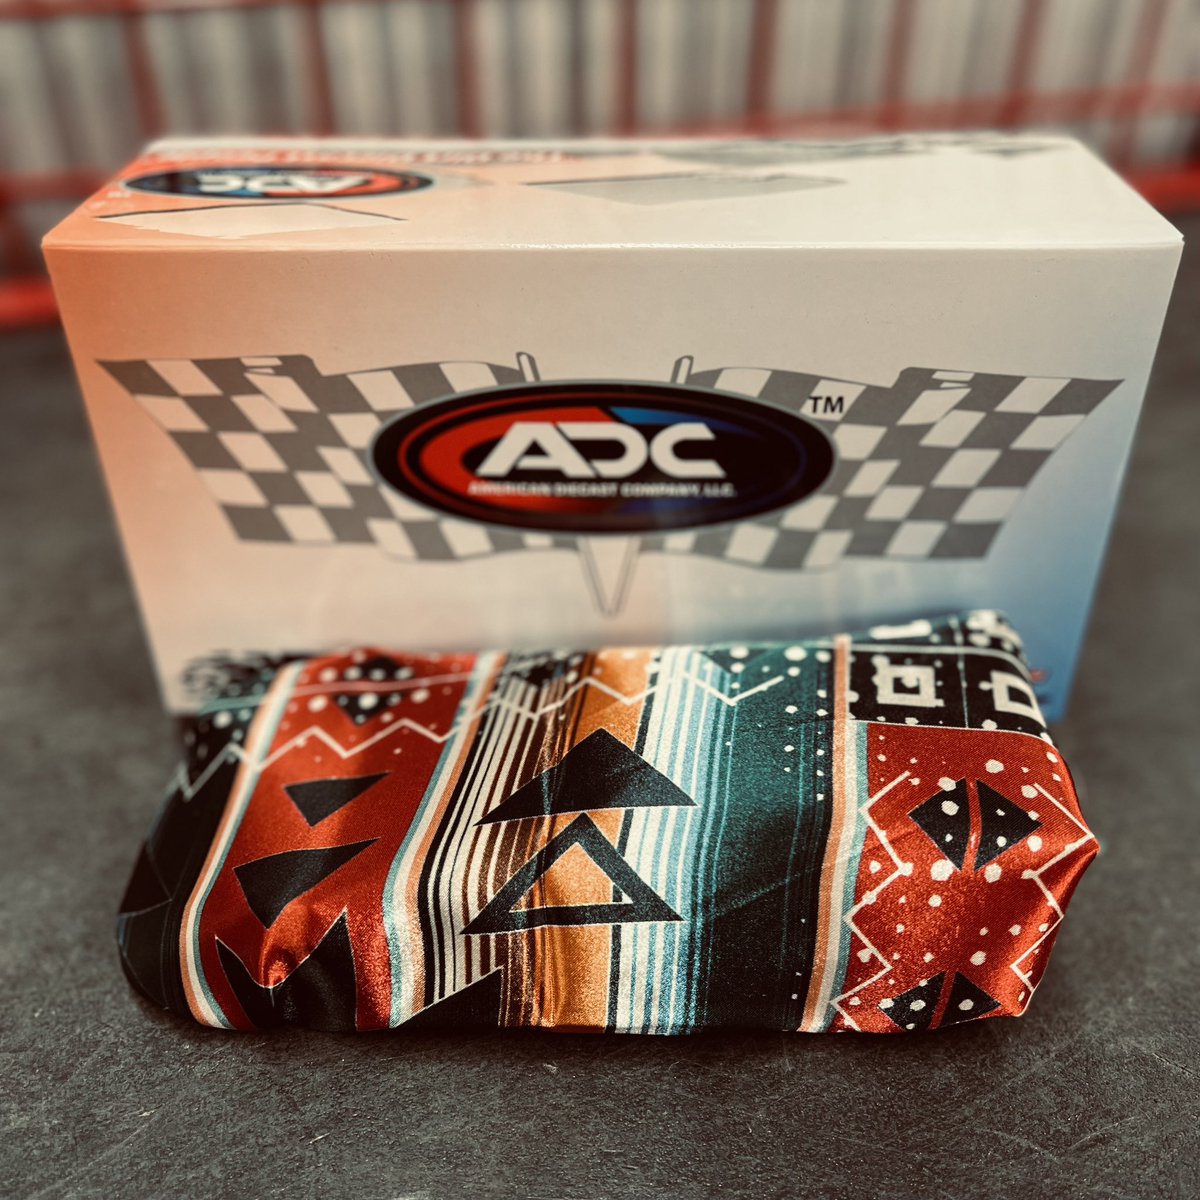 We are excited to offer to you… An ADC diecast in the 1:24 and 1:64. This will be a special design that we will be unveiling at the Dream.   THIS WILL BE A LIMITED SUPPLY.   PREORDER yours now at: raceranchwear.com/mike-marlar This preorder will begin shipping the first week of July.